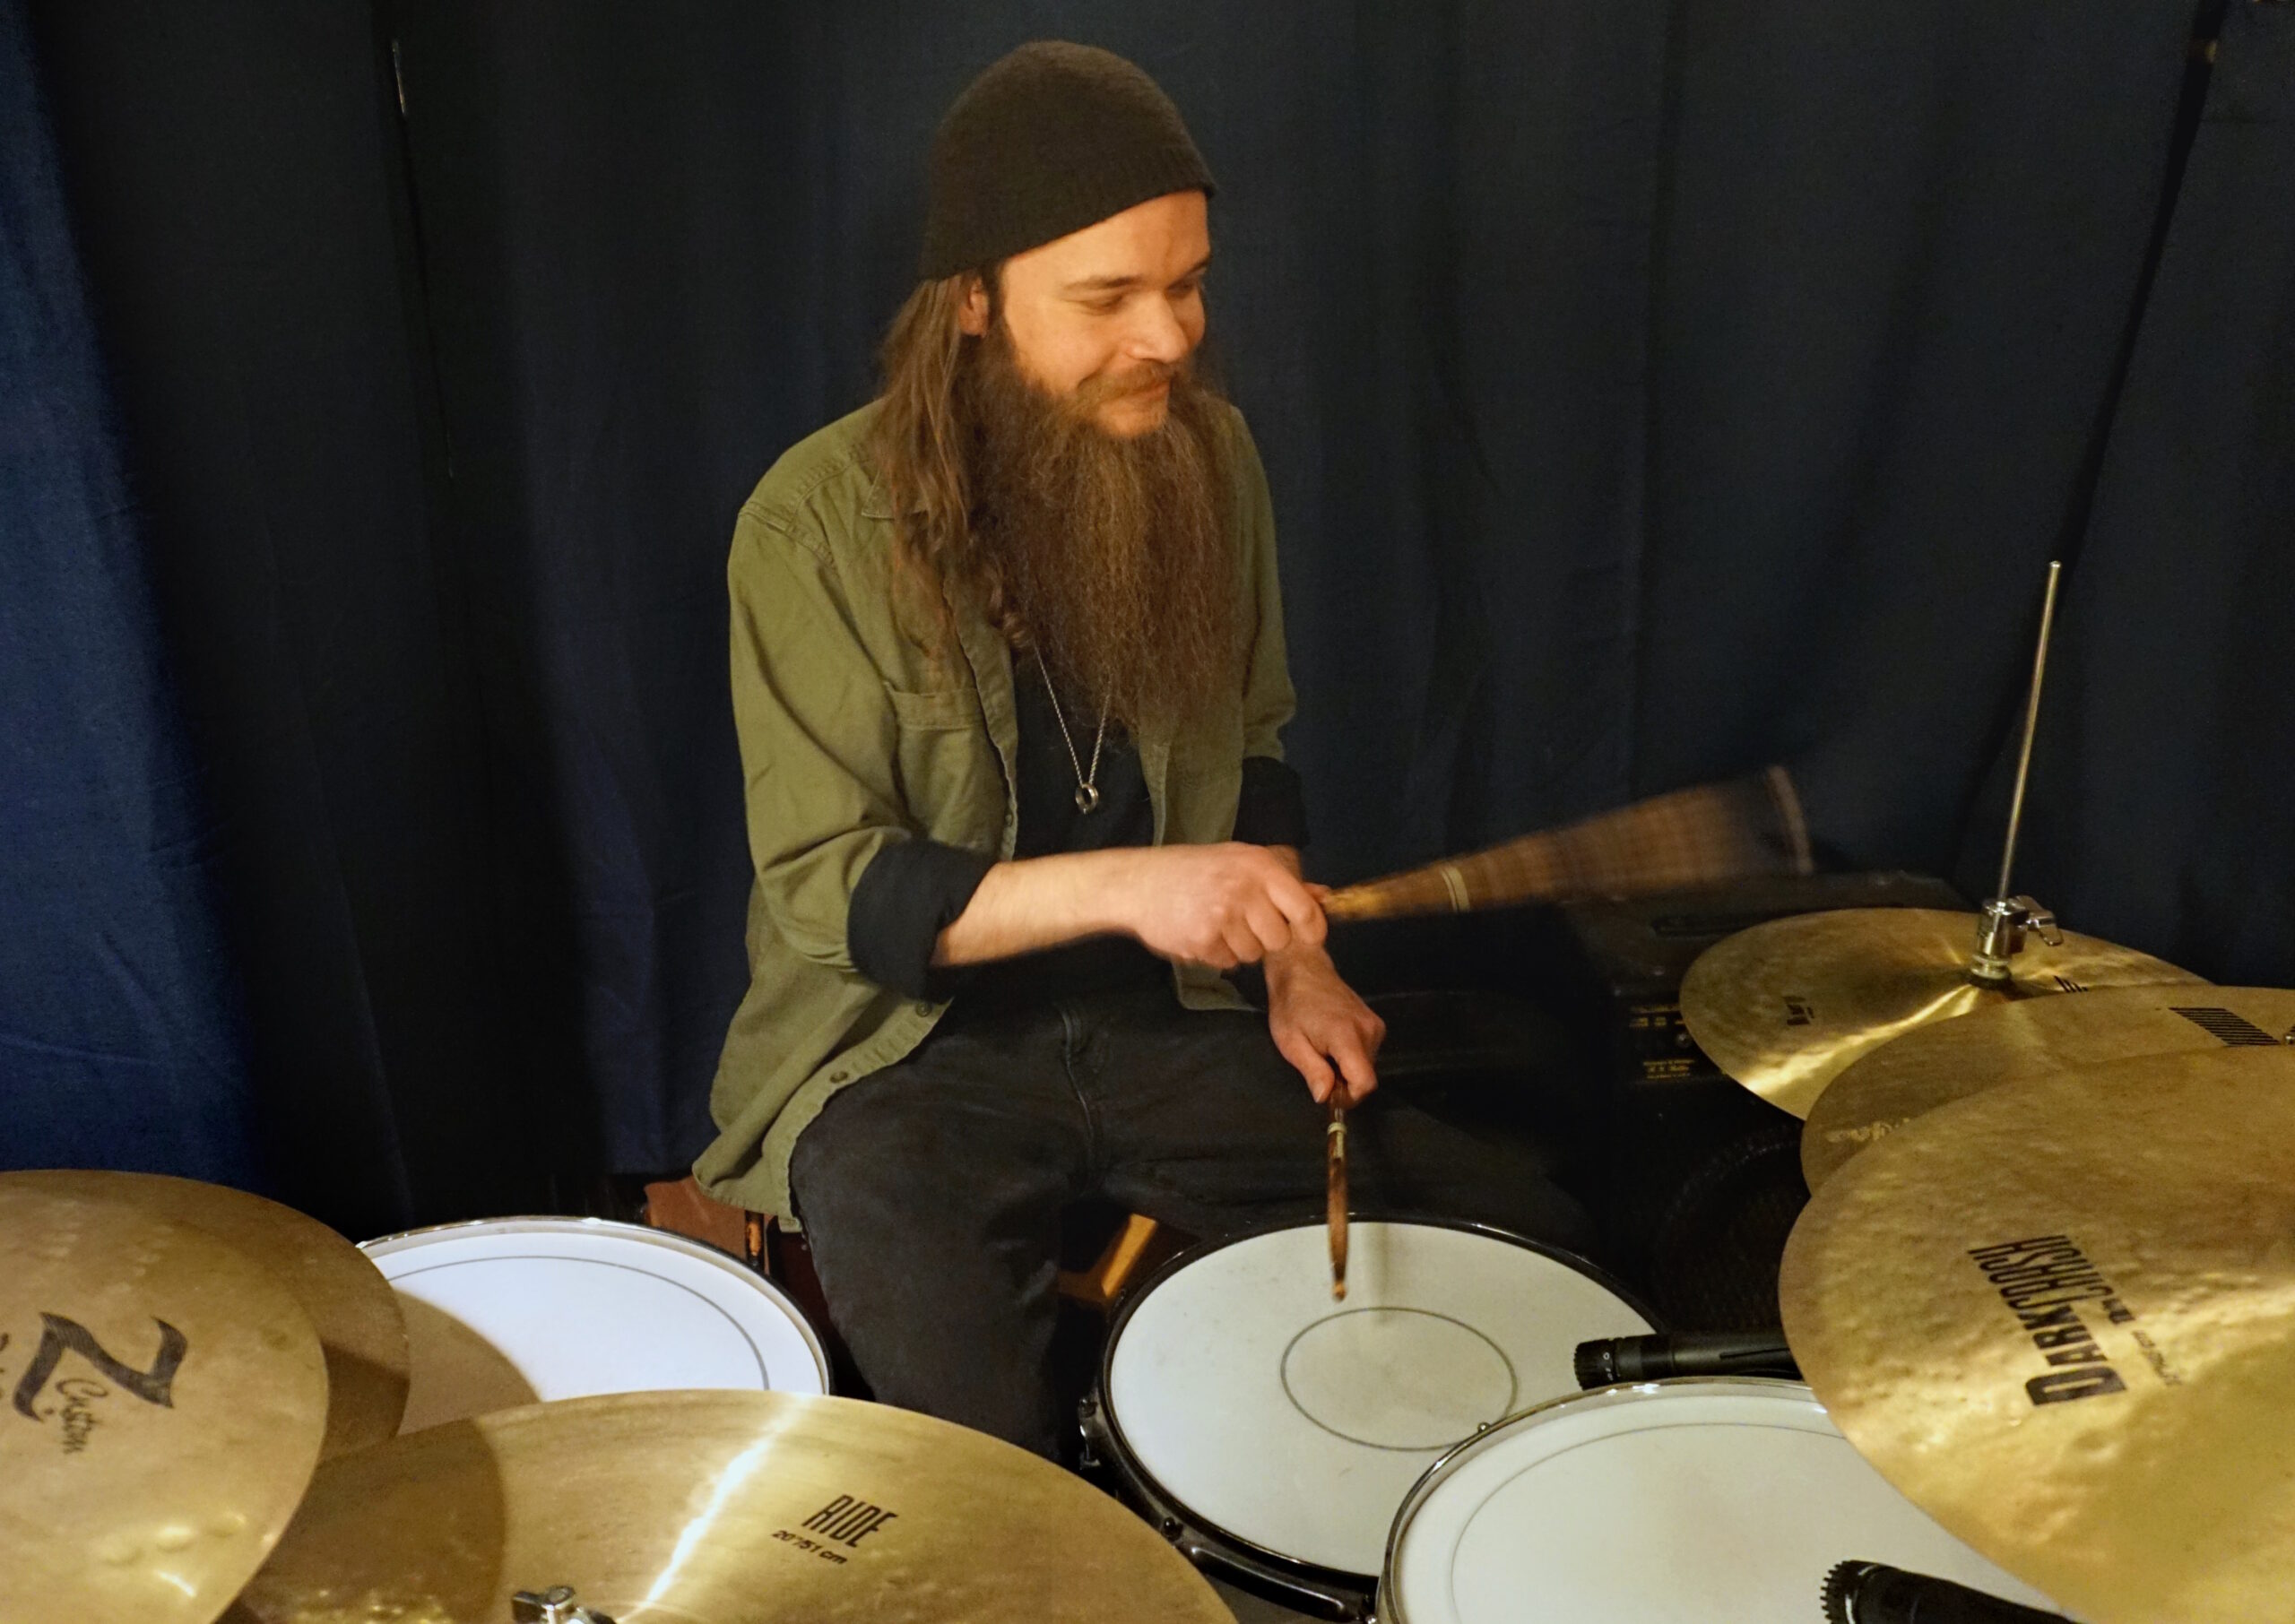 Cassidy Jay sits at a kit, drumsticks in each hand. His right hand is blurred as it hits a cymbal. He has a smile on his face, with his head turned away from the camera.